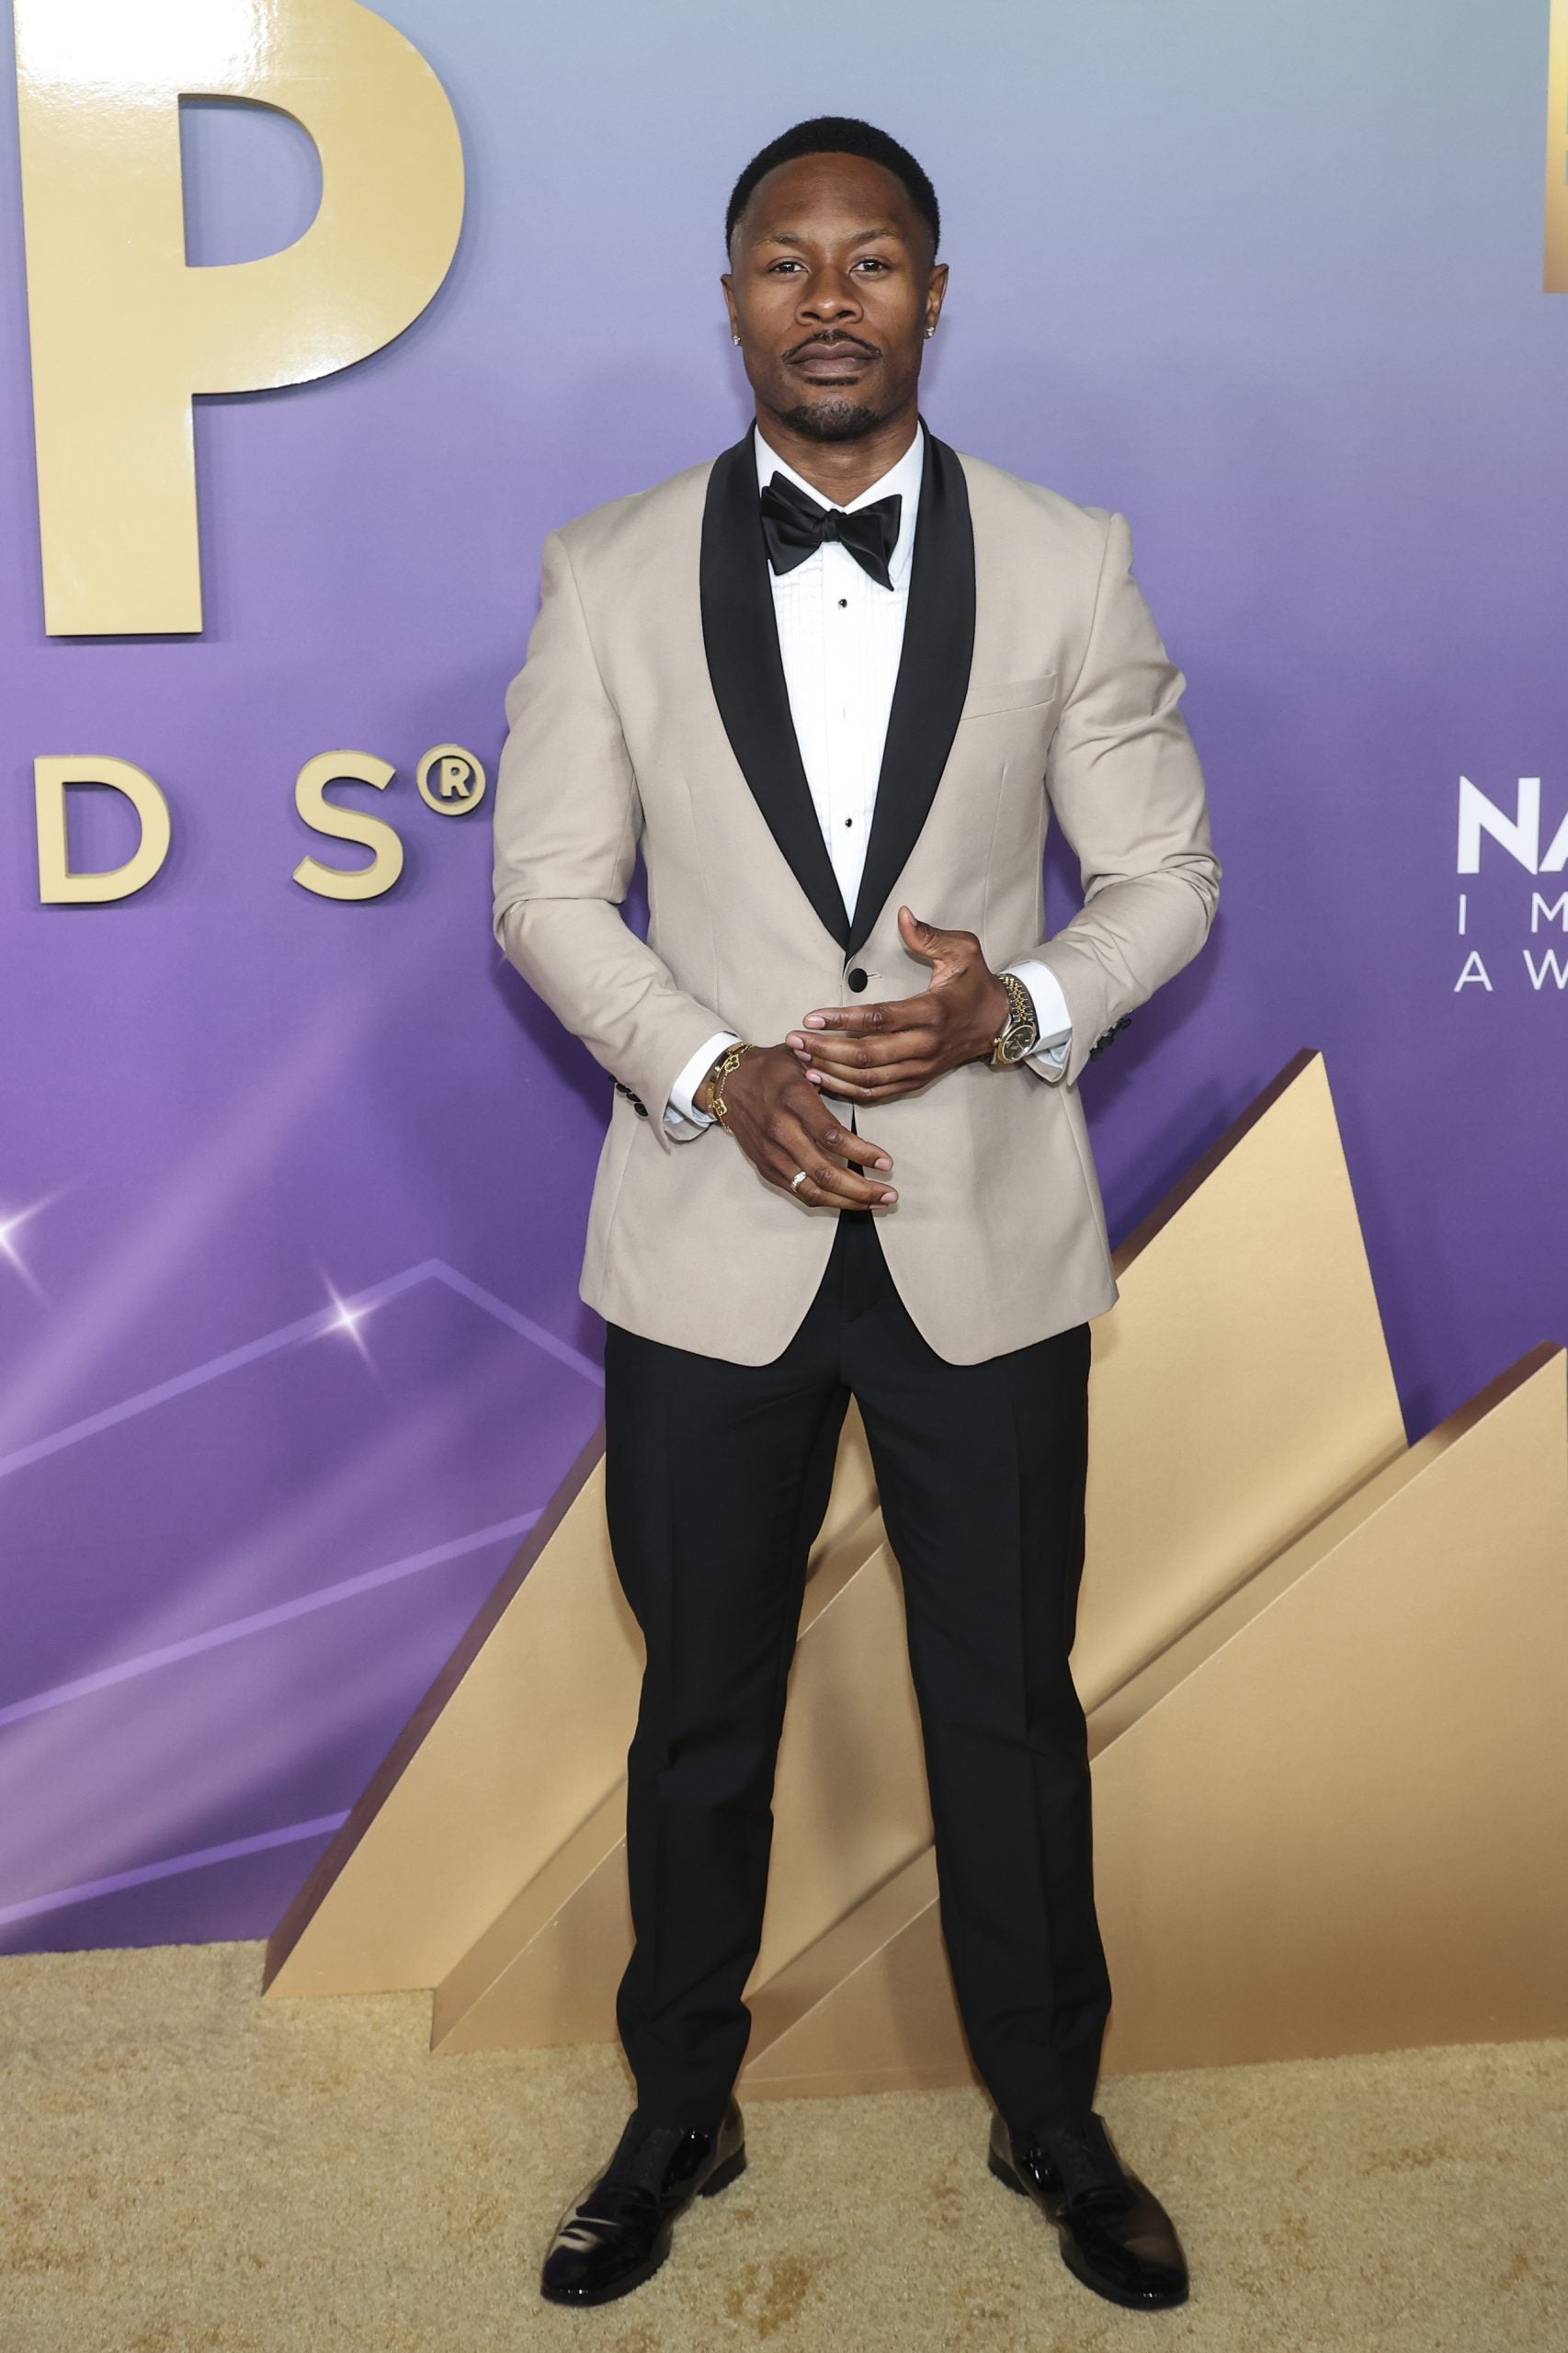 The Best Red Carpet Looks At The NAACP Image Awards